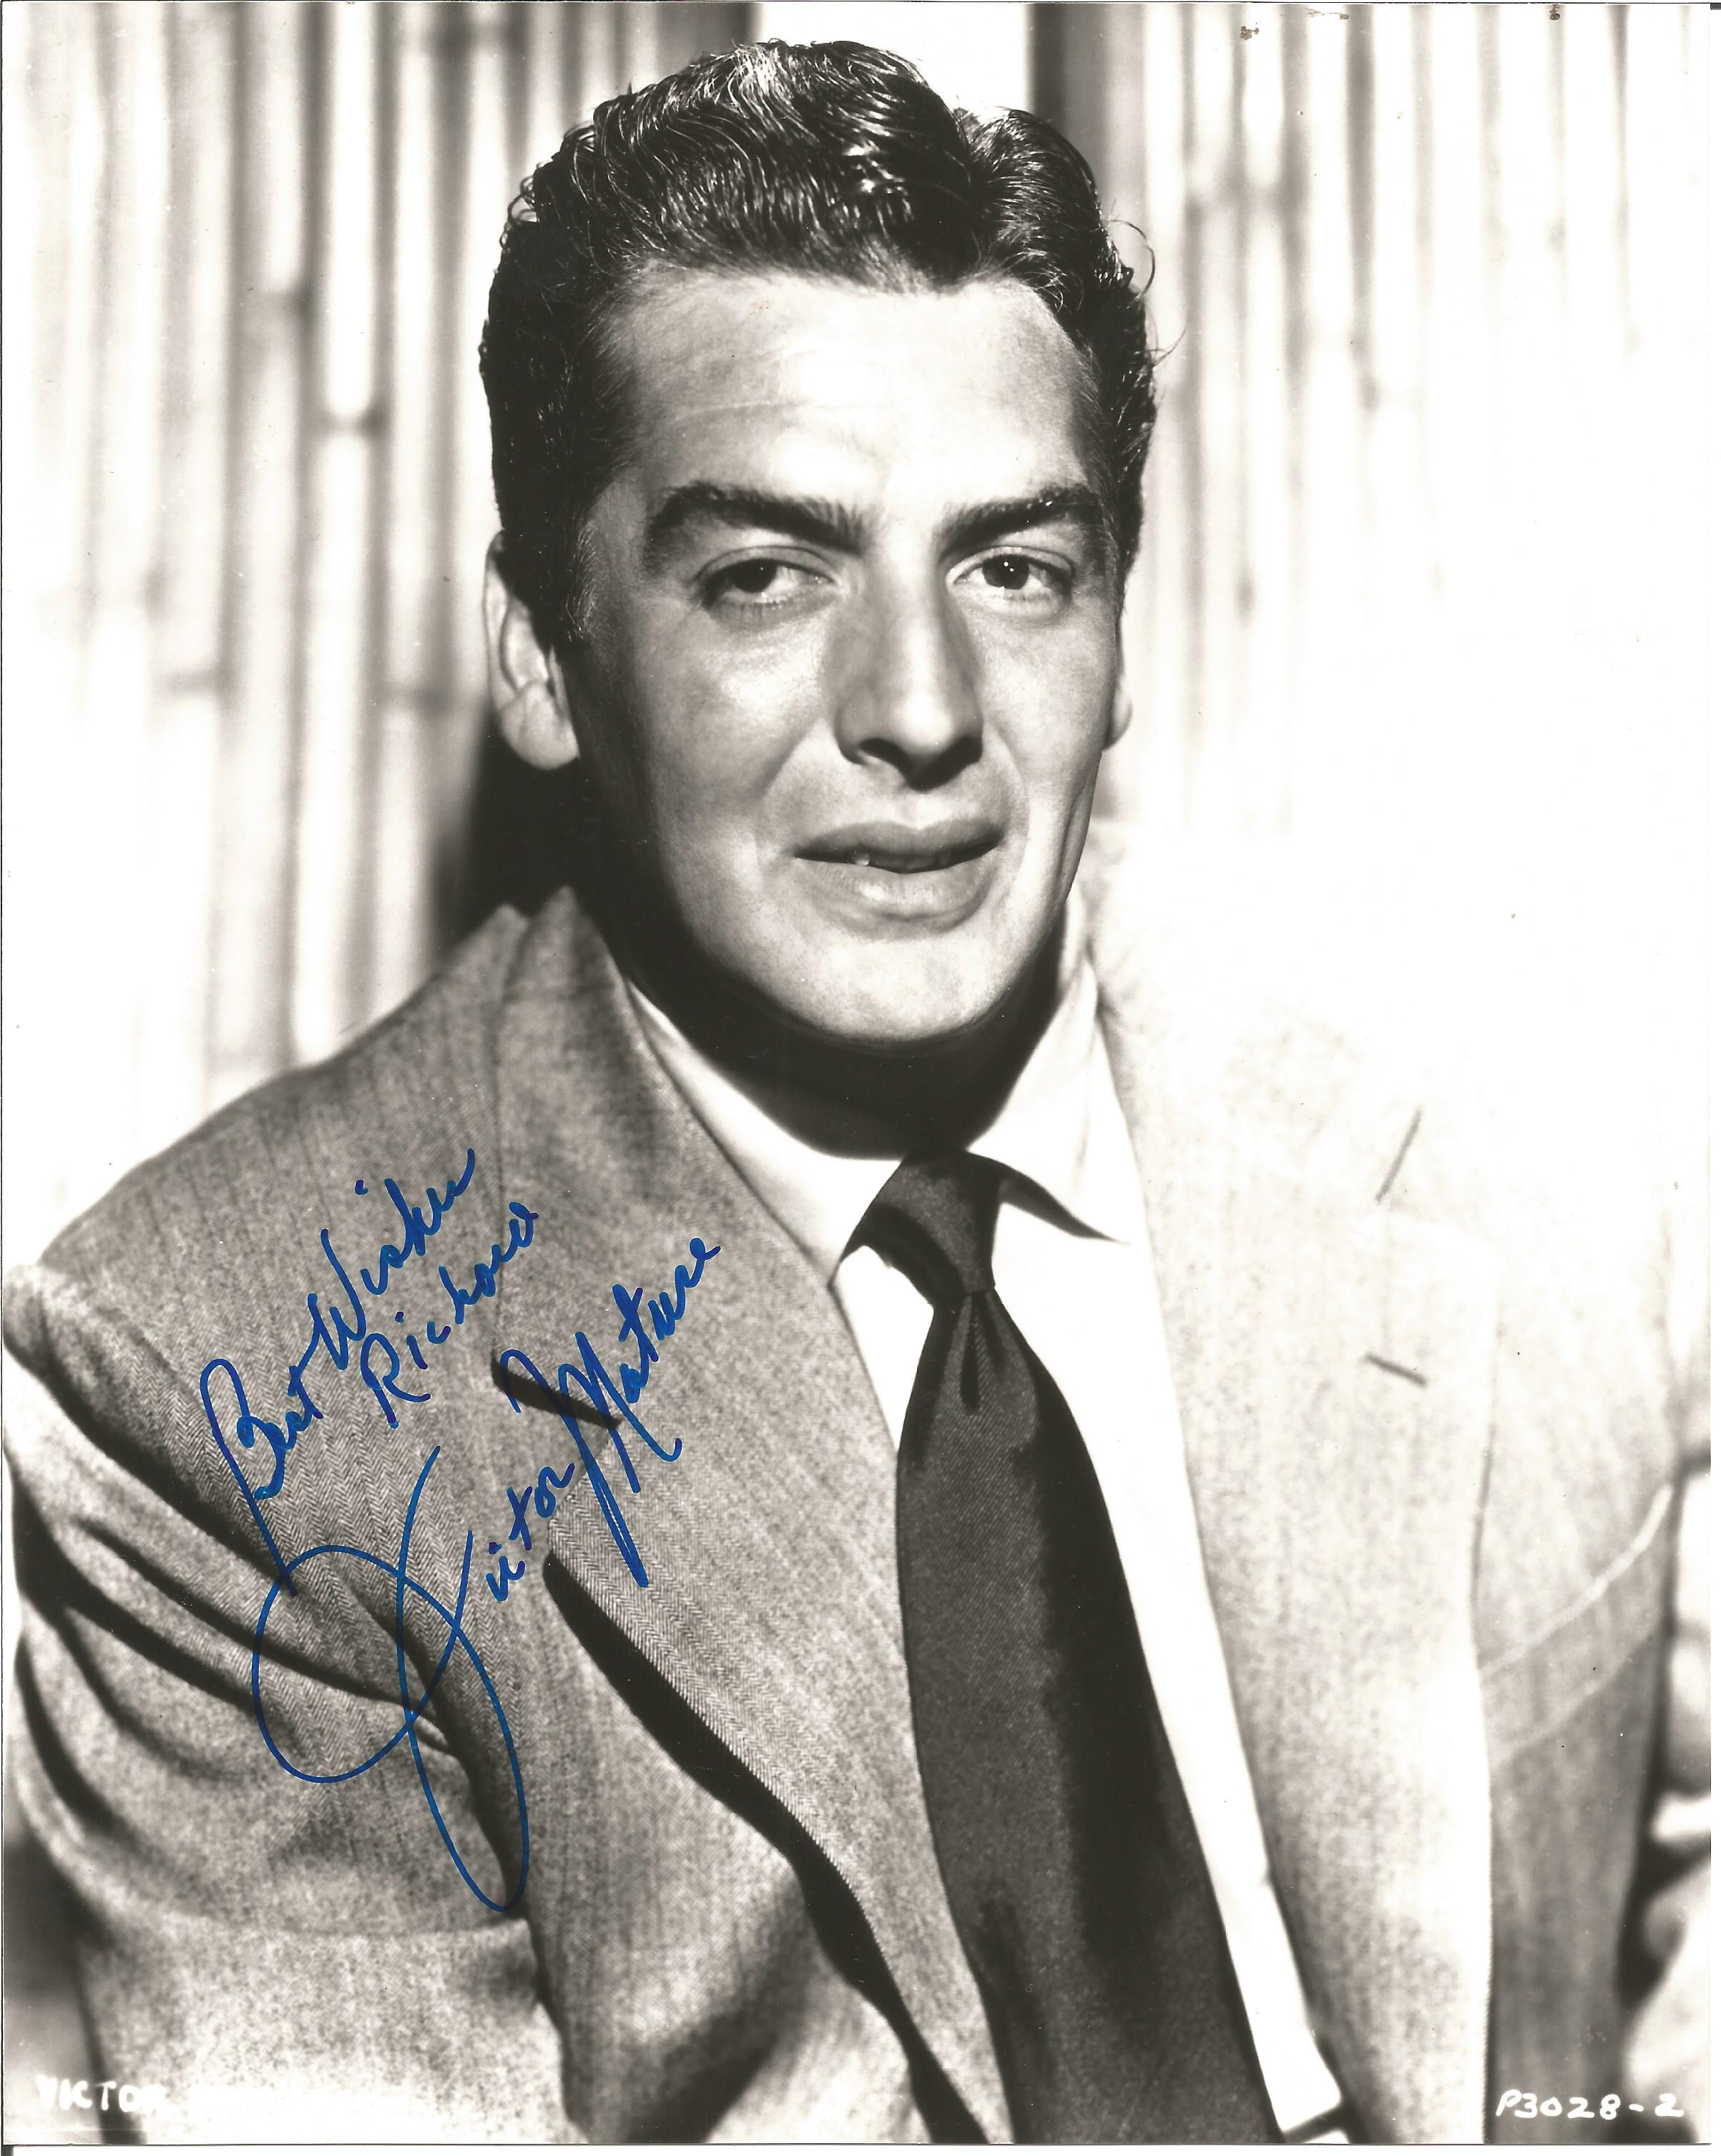 Victor Mature signed 10x8 black and white photo dedicated. Good condition. All autographs come